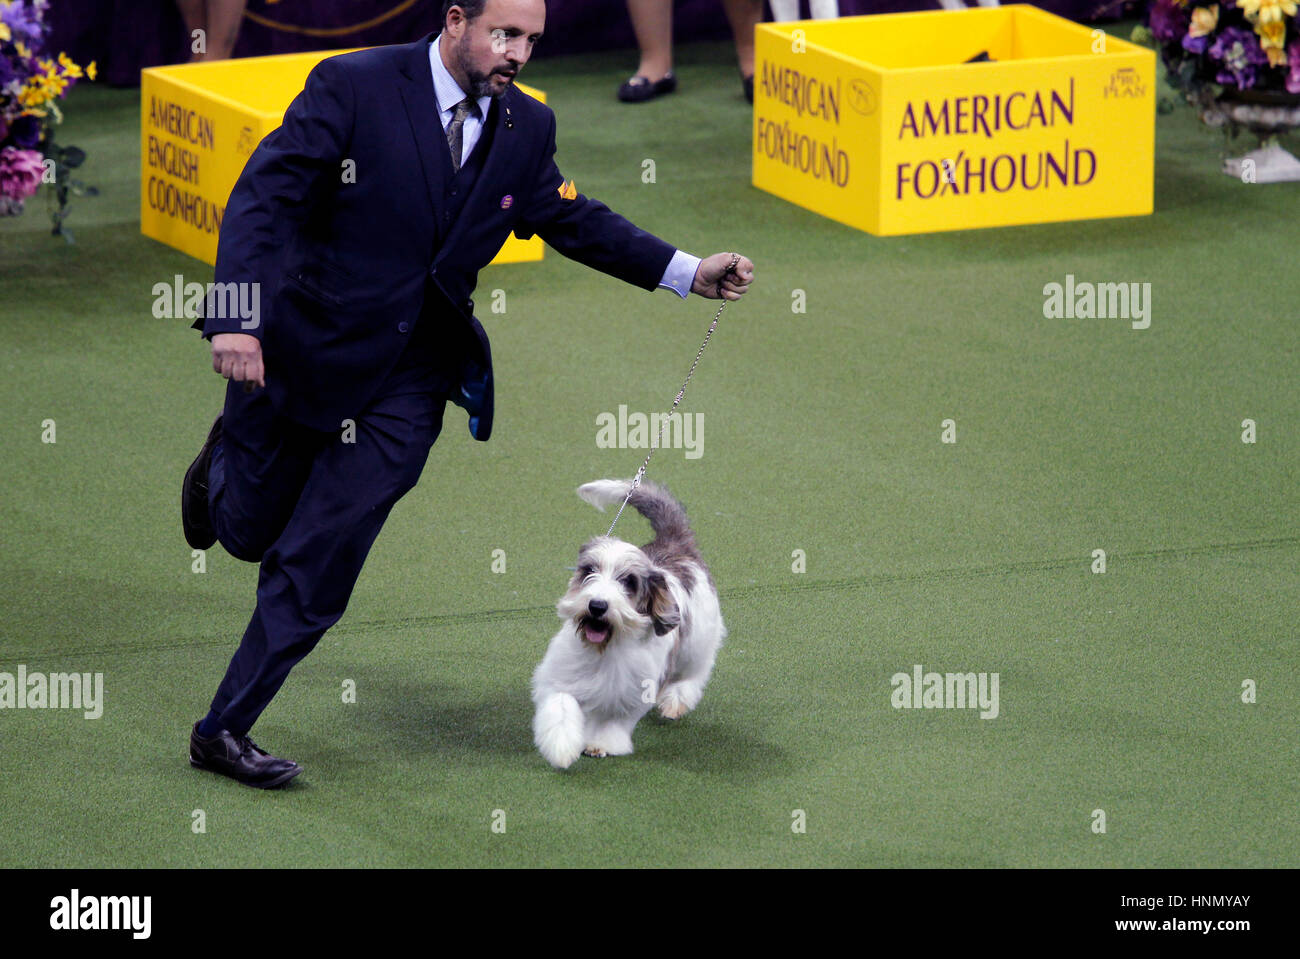 New York, United States. 13th Feb, 2017. 'Iceage' a Petite Basset Griffon Vendeen competing in the Hound Division at the 141st Annual Westminster Dog Show at Madison Square Garden in New York City on February 13th, 2017. Credit: Adam Stoltman/Alamy Live News Stock Photo